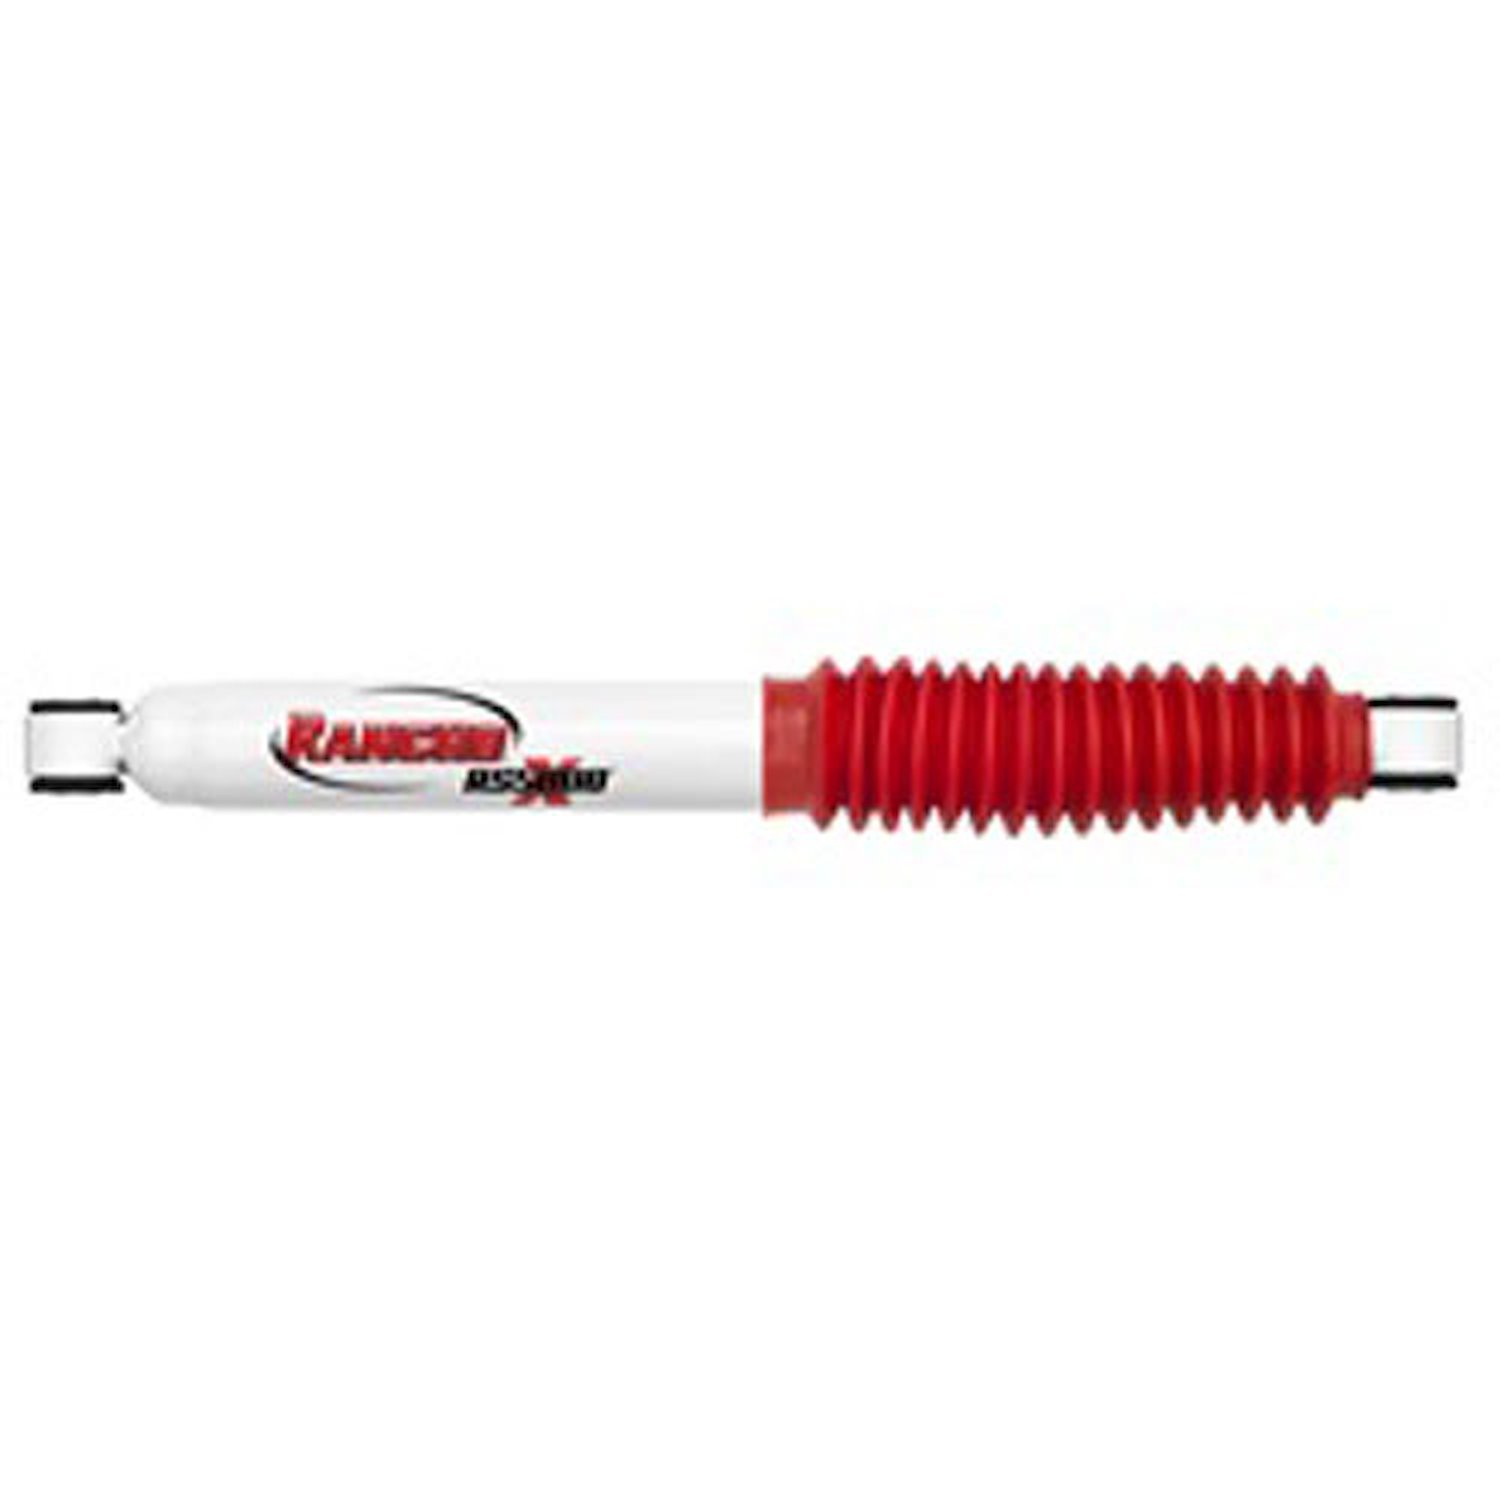 RS5000X Rear Shock Absorber Fits GM 1500 and Dodge Ram Pickups